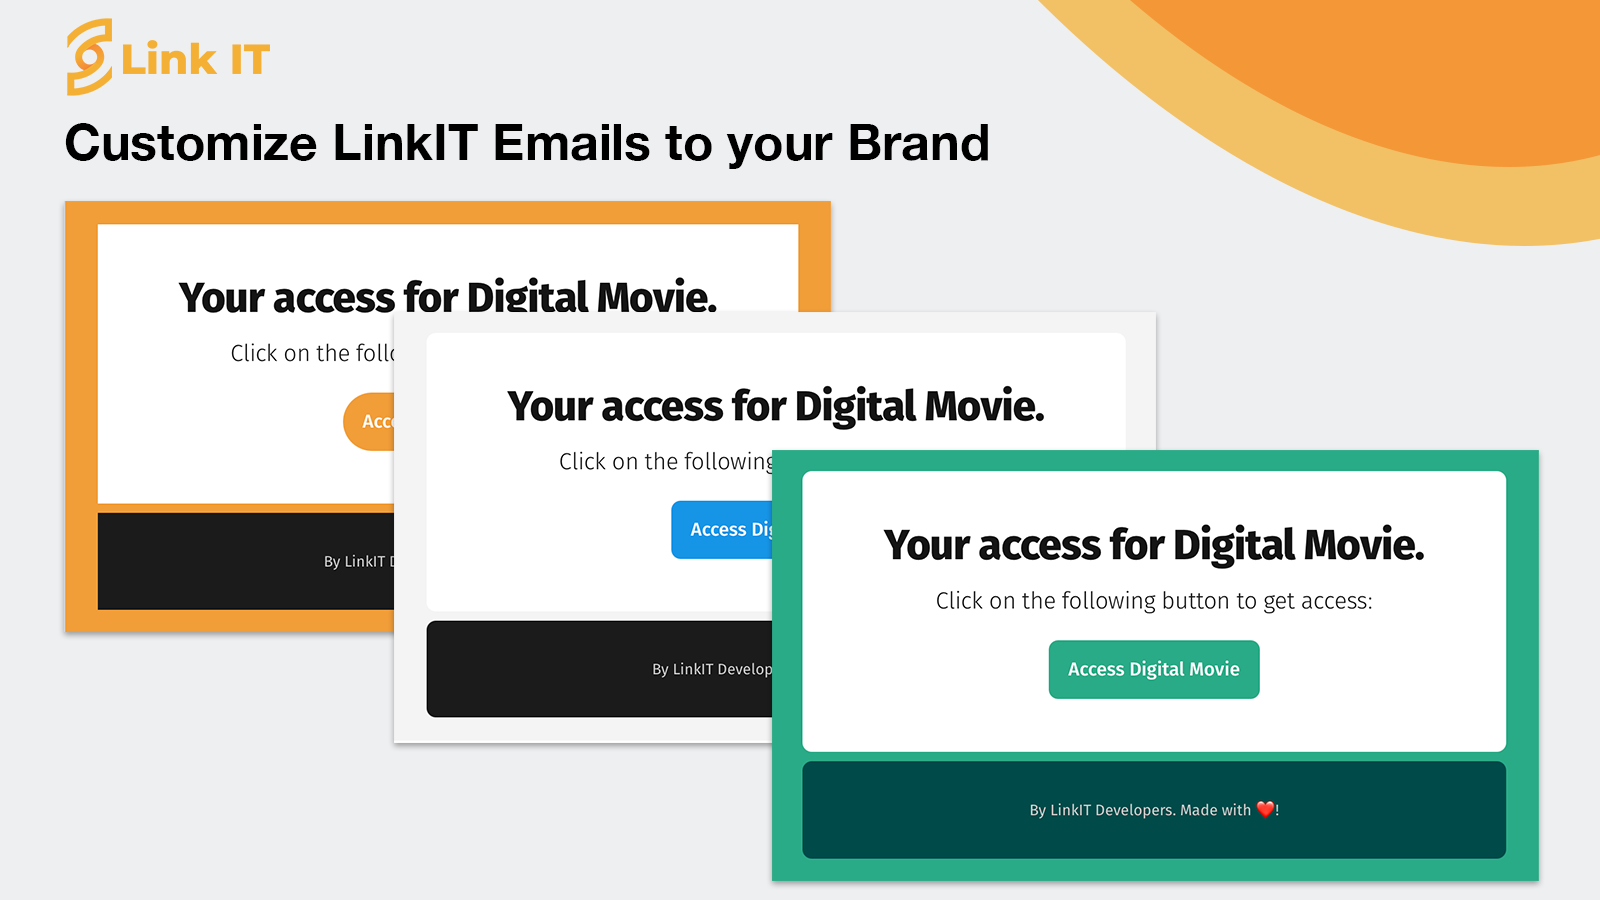 Customize LinkIT emails to your brand